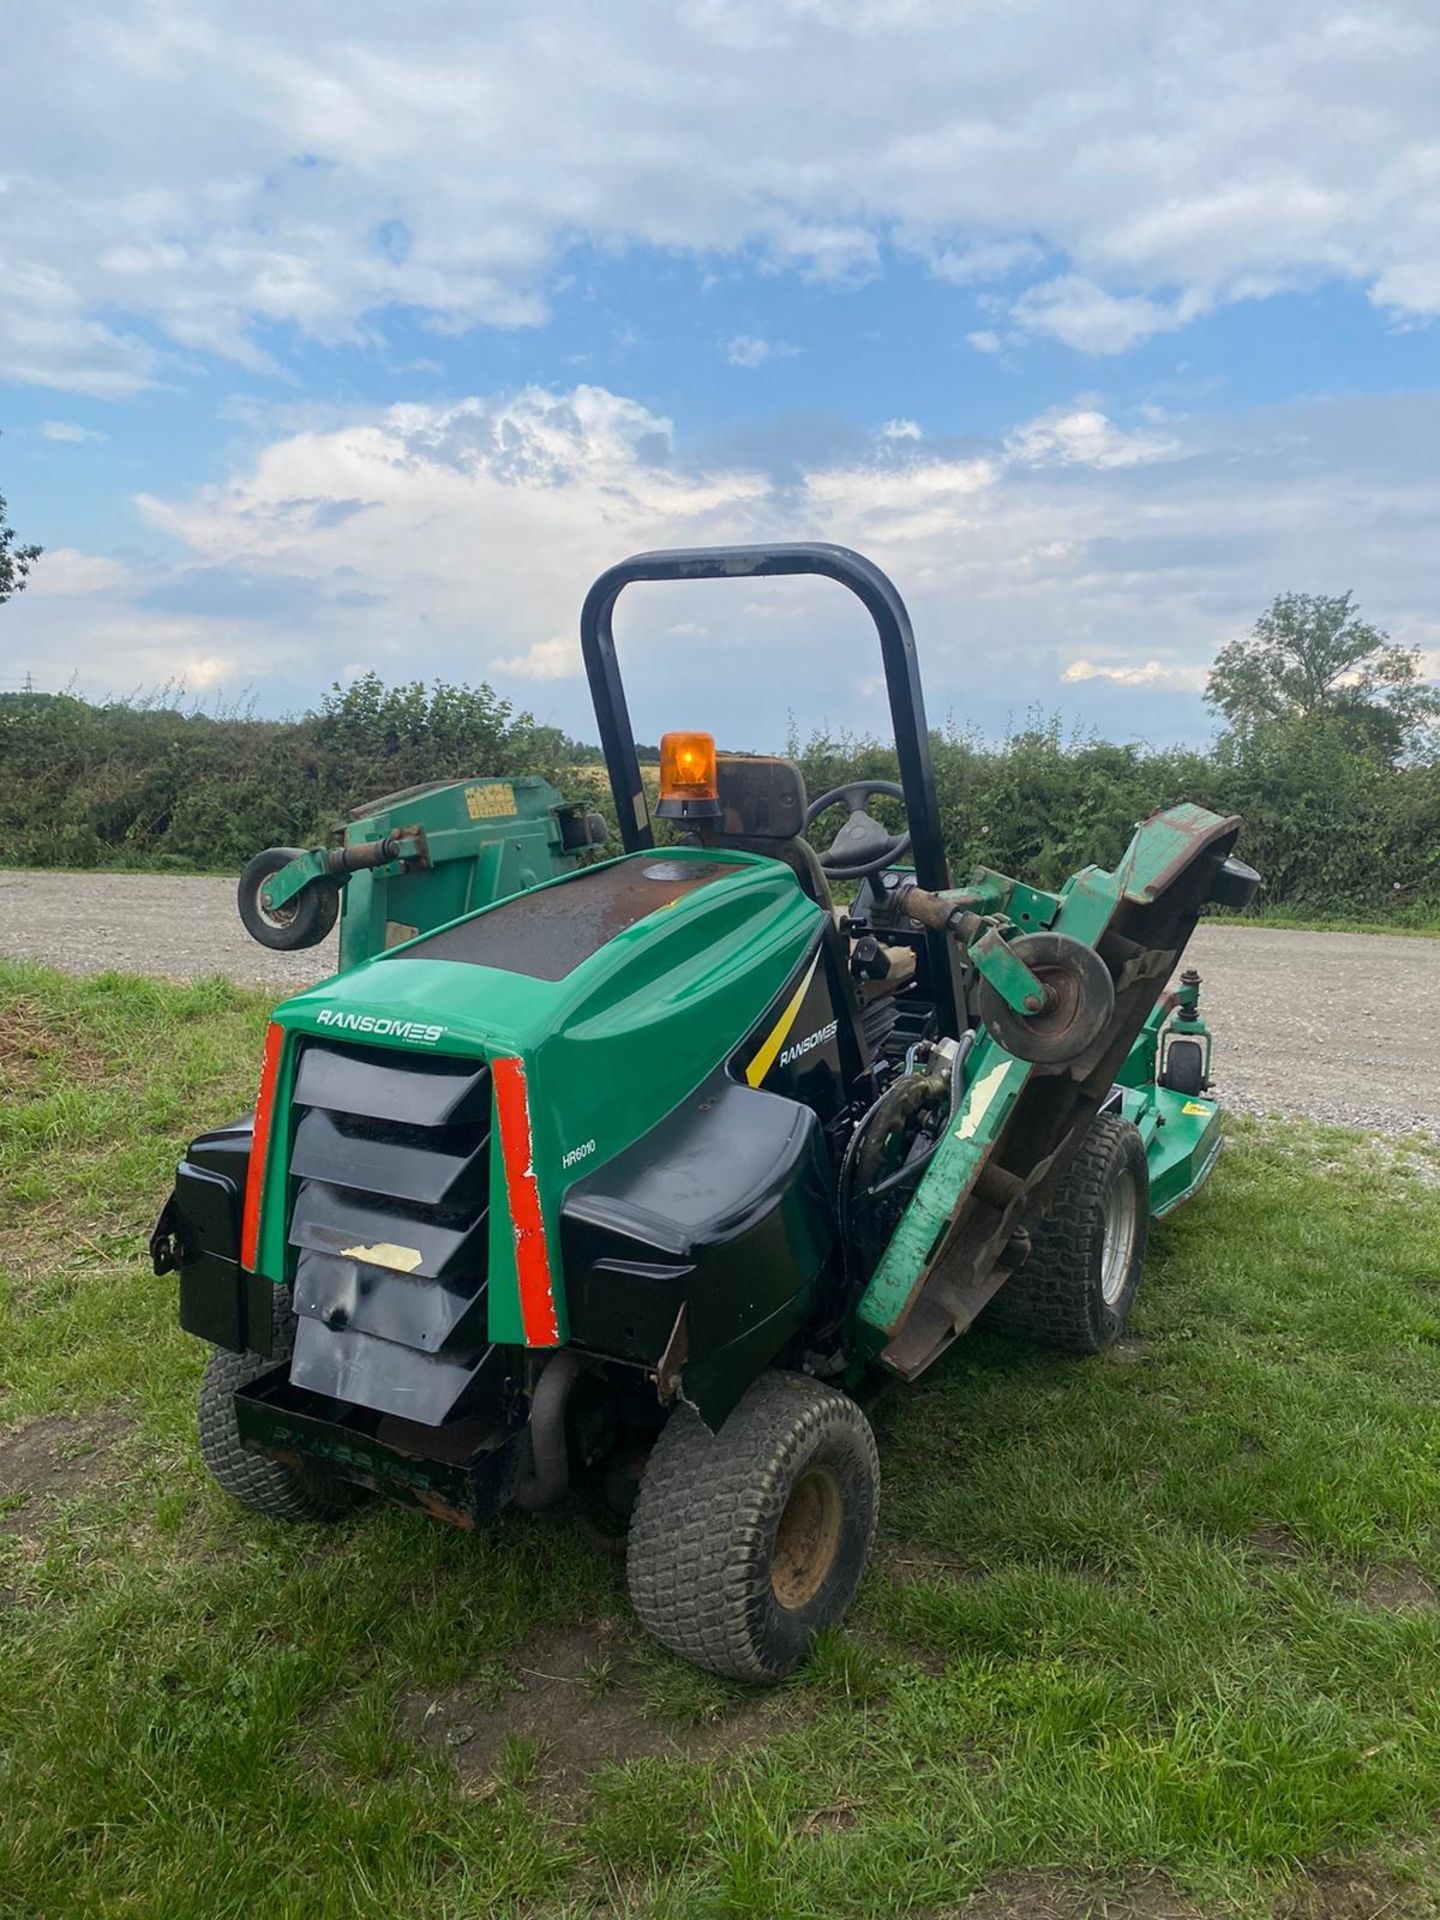 RANSOMES BATWING HR6010 RIDE ON LAWN MOWER, 4 WHEEL DRIVE, 3390 RECORDED HOURS *NO VAT* - Image 7 of 9